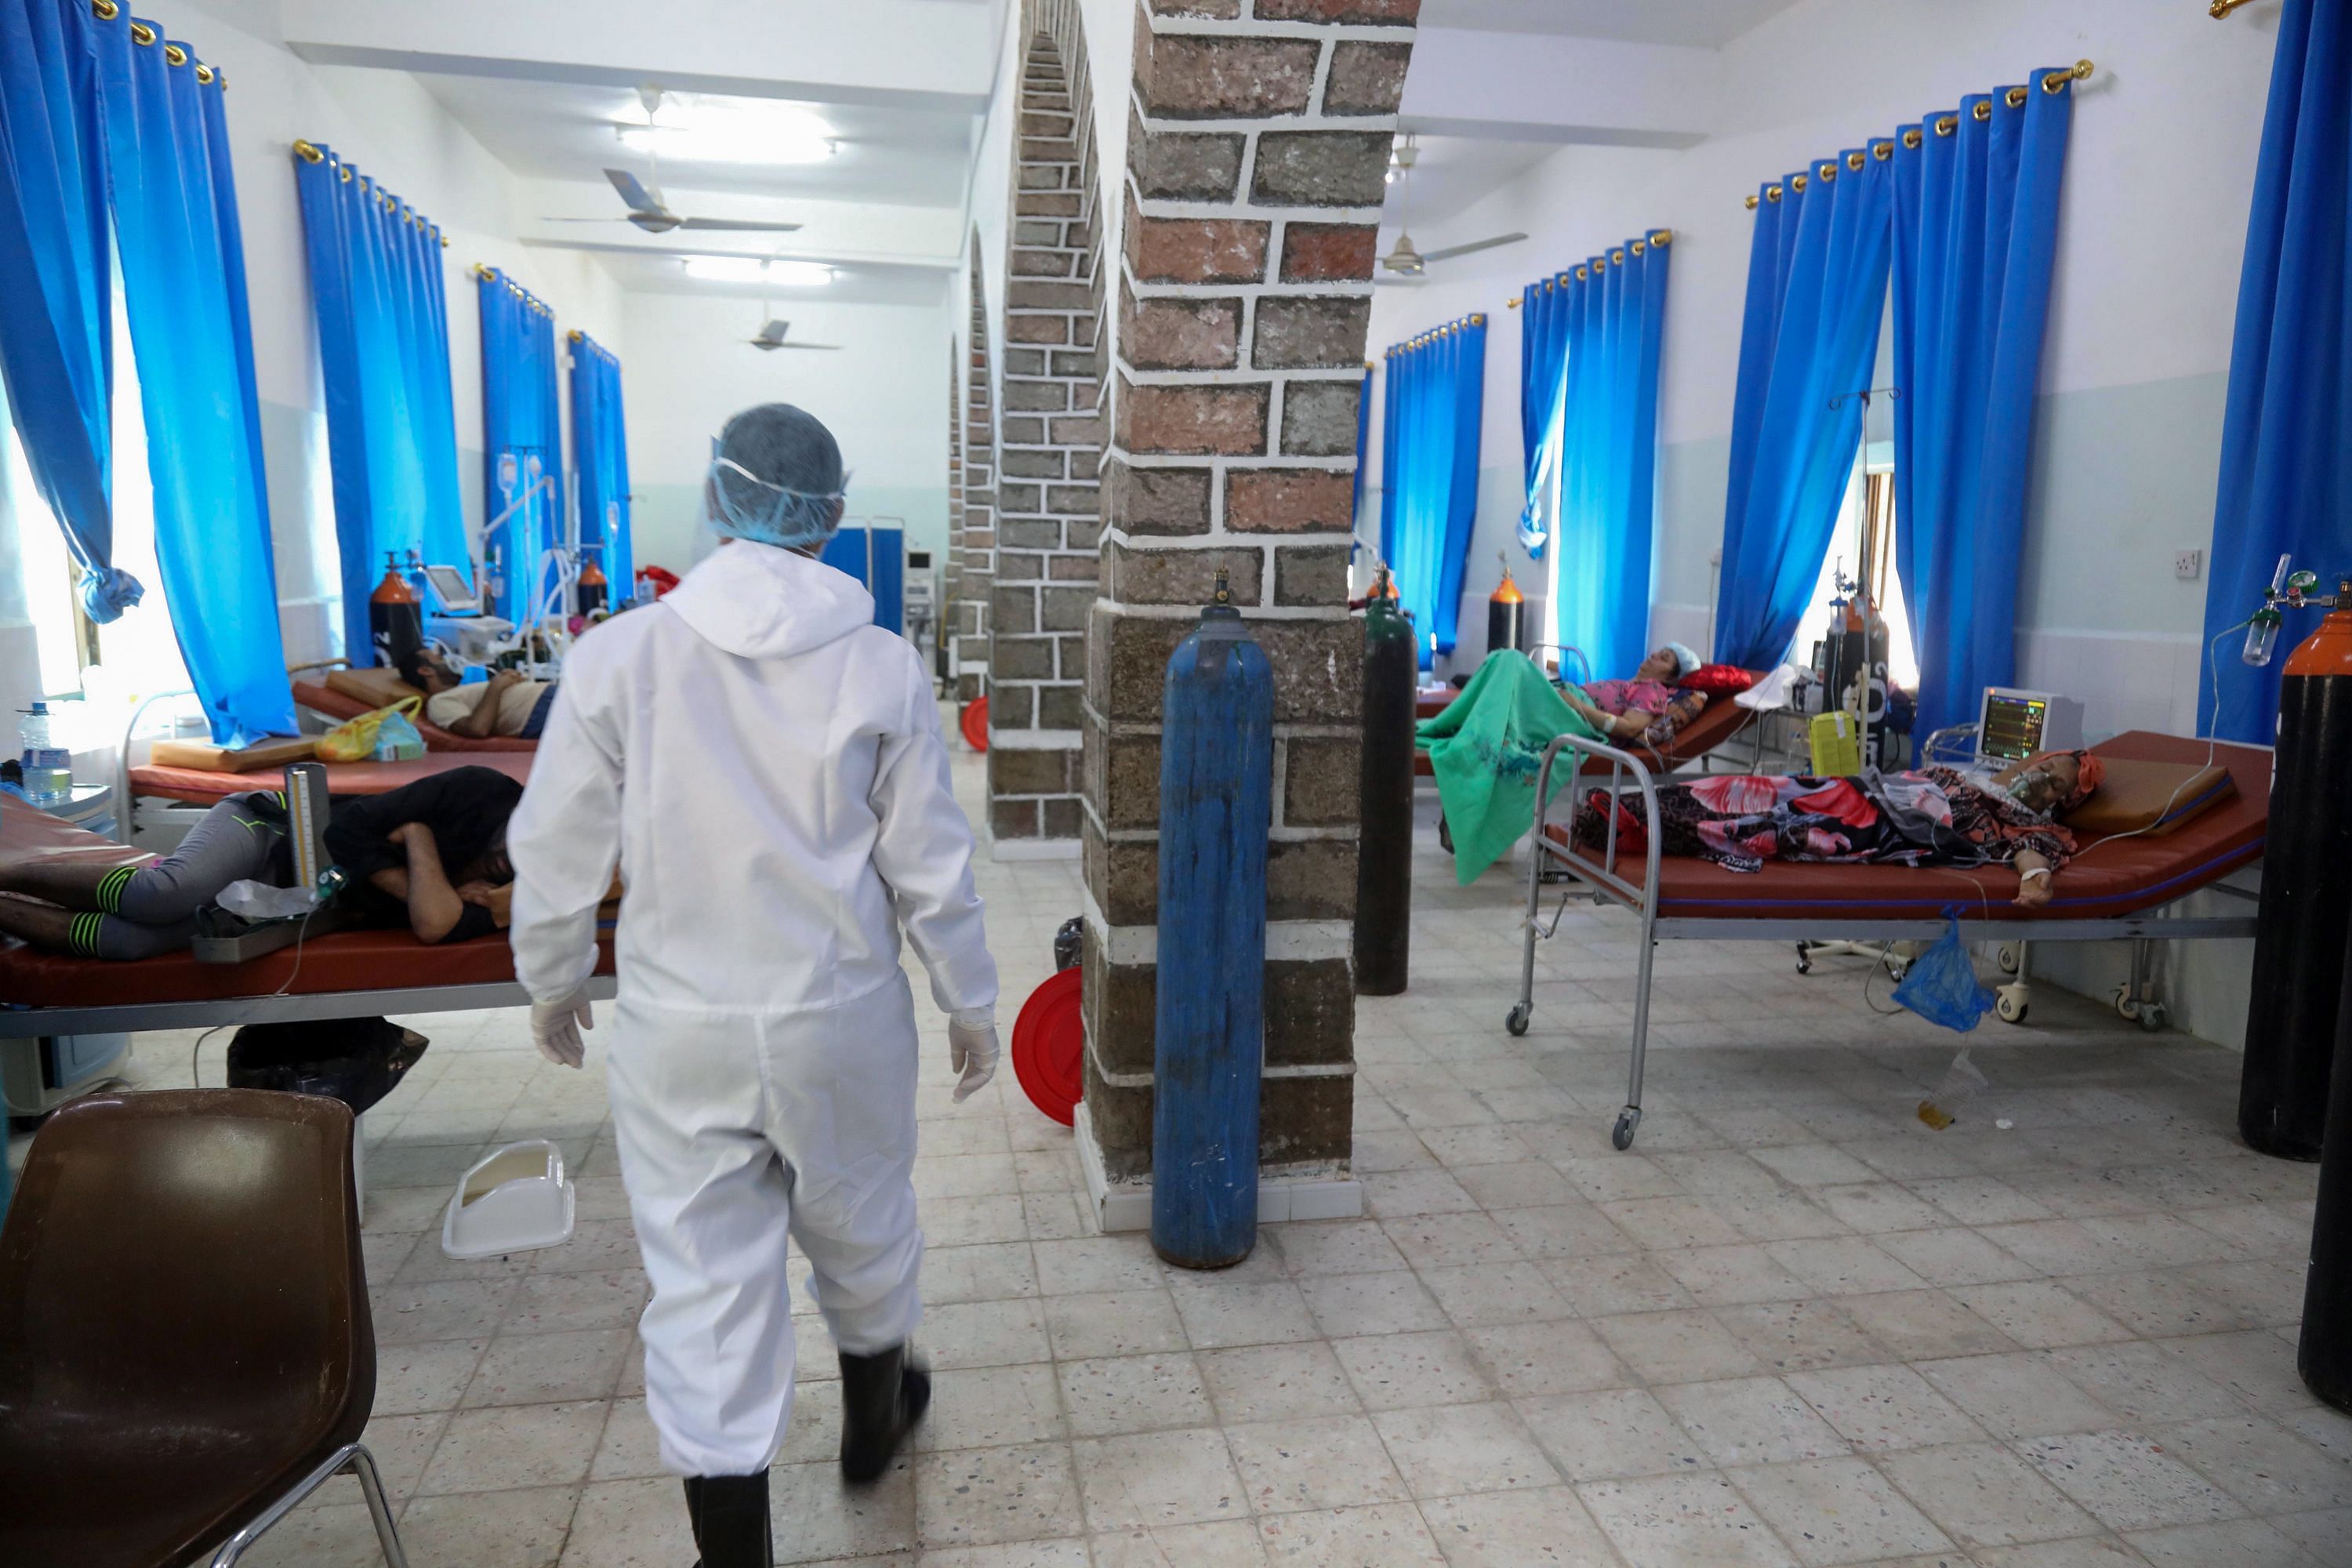 A Yemeni member of the medical staff in a full hazmat suit walks in the patient ward at a quarantine center where COVID-19 patients are treated in Yemen's third city of Taez, on June 21, 2020. (Photo by AFP)